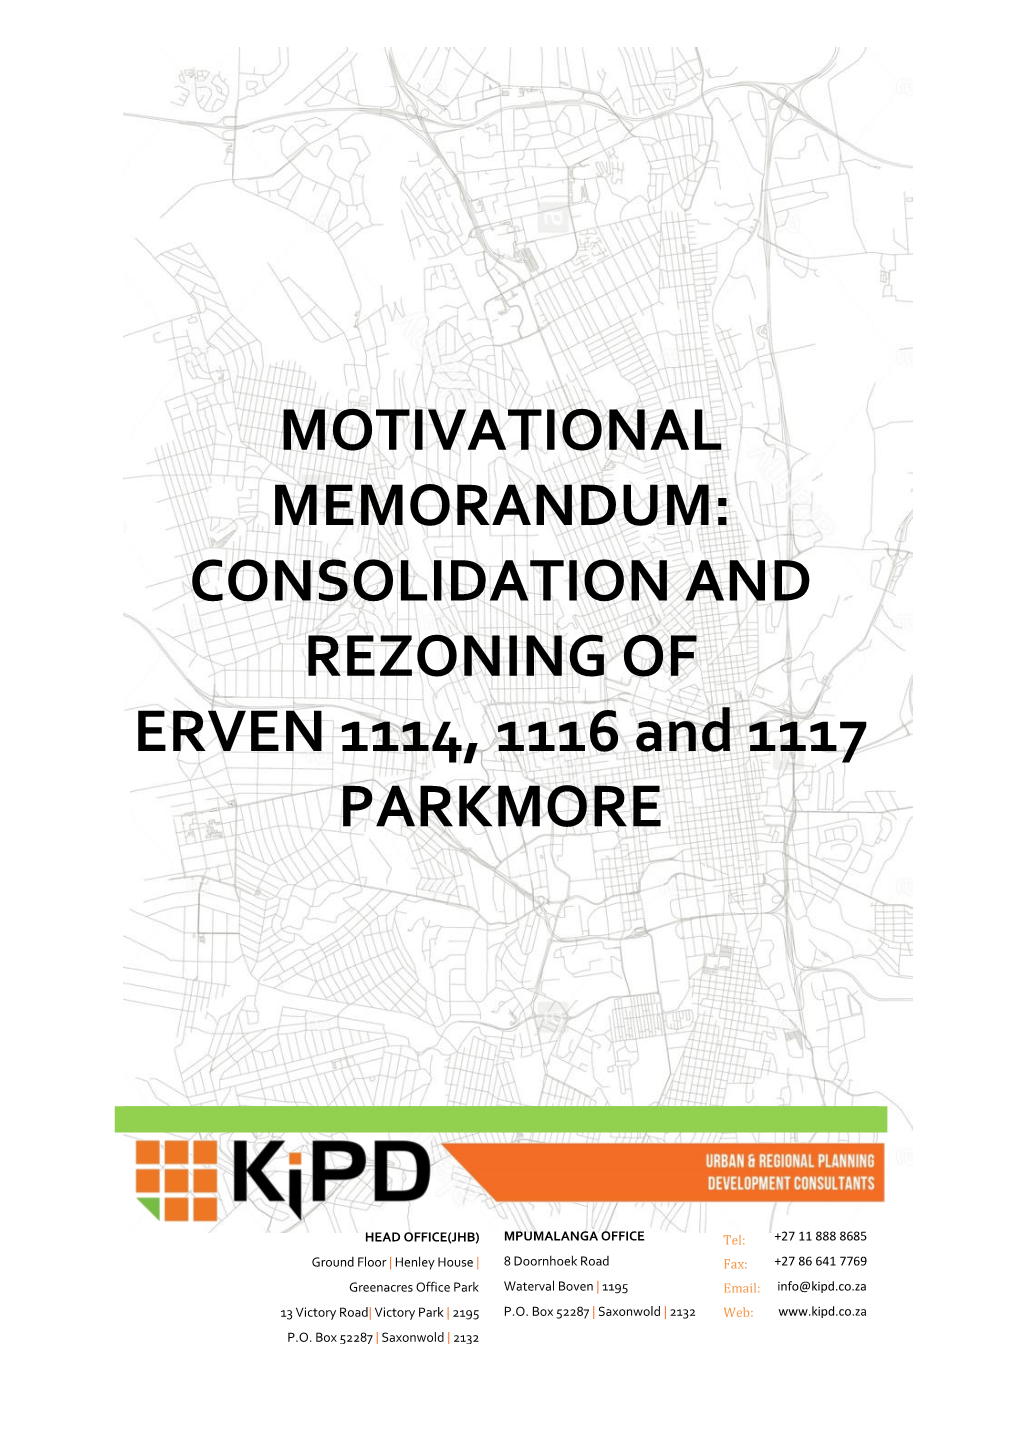 MOTIVATIONAL MEMORANDUM: CONSOLIDATION and REZONING of ERVEN 1114, 1116 and 1117 PARKMORE